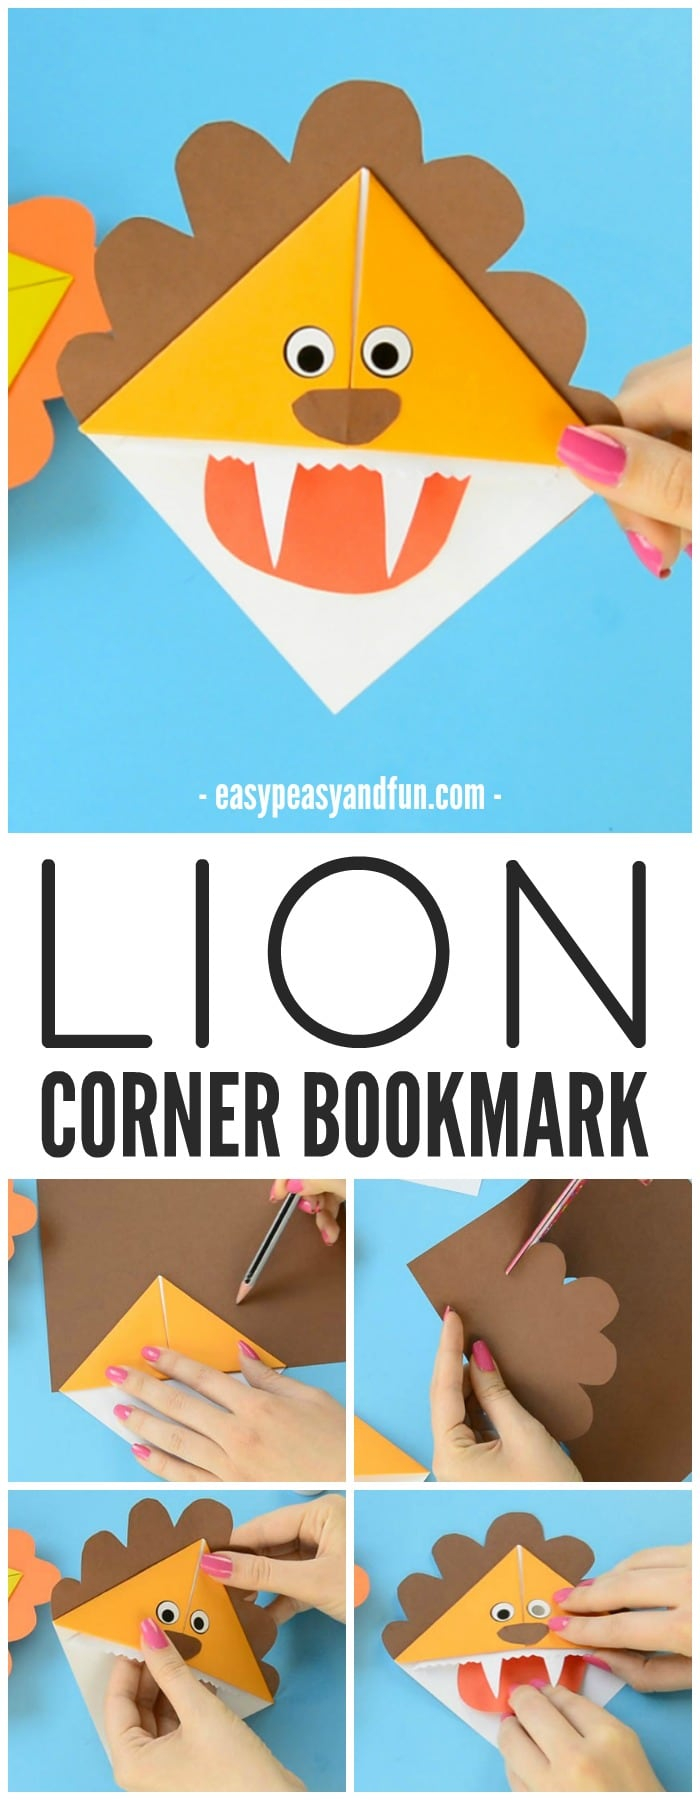 Lion Origami Easy Lion Corner Bookmarks Step Step Tutorial Easy Peasy And Fun